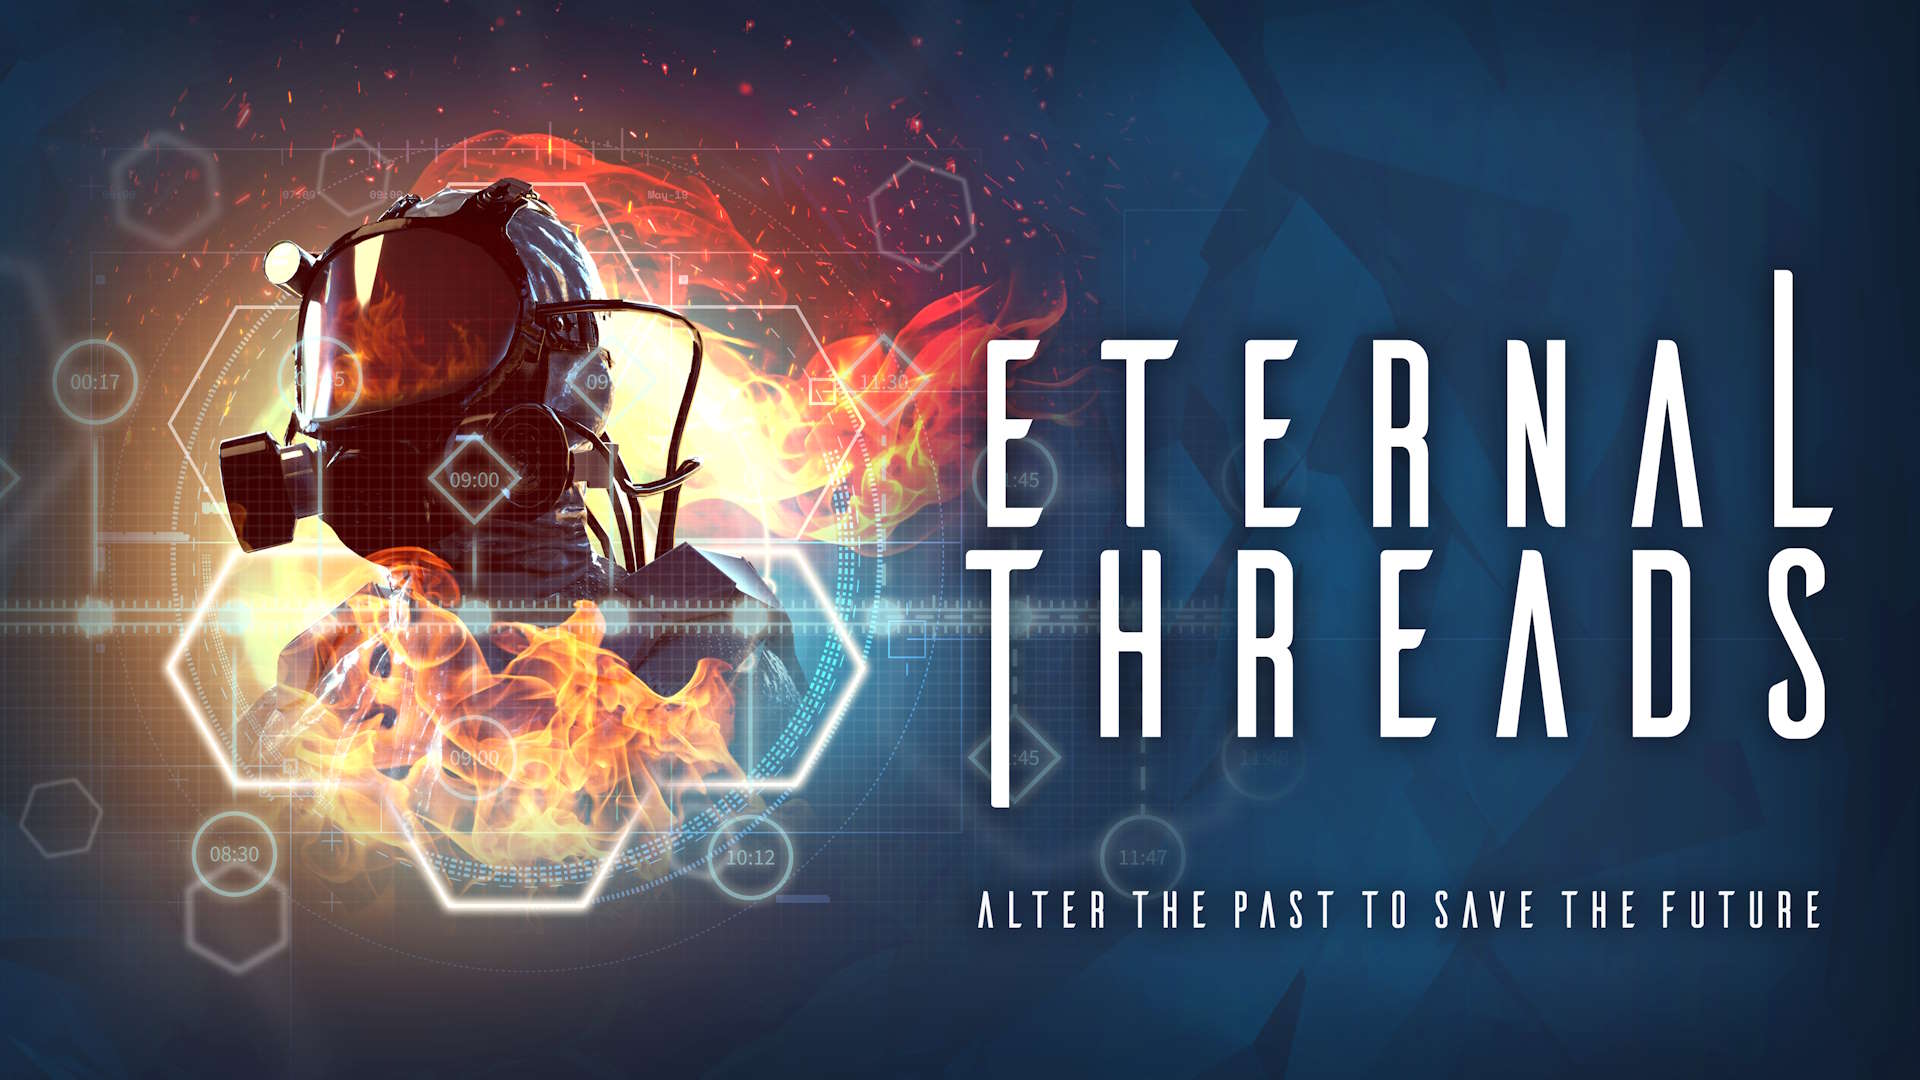 Key art for Eternal Threads, showing a masked face emerging from a collection of time codes in futuristic fonts